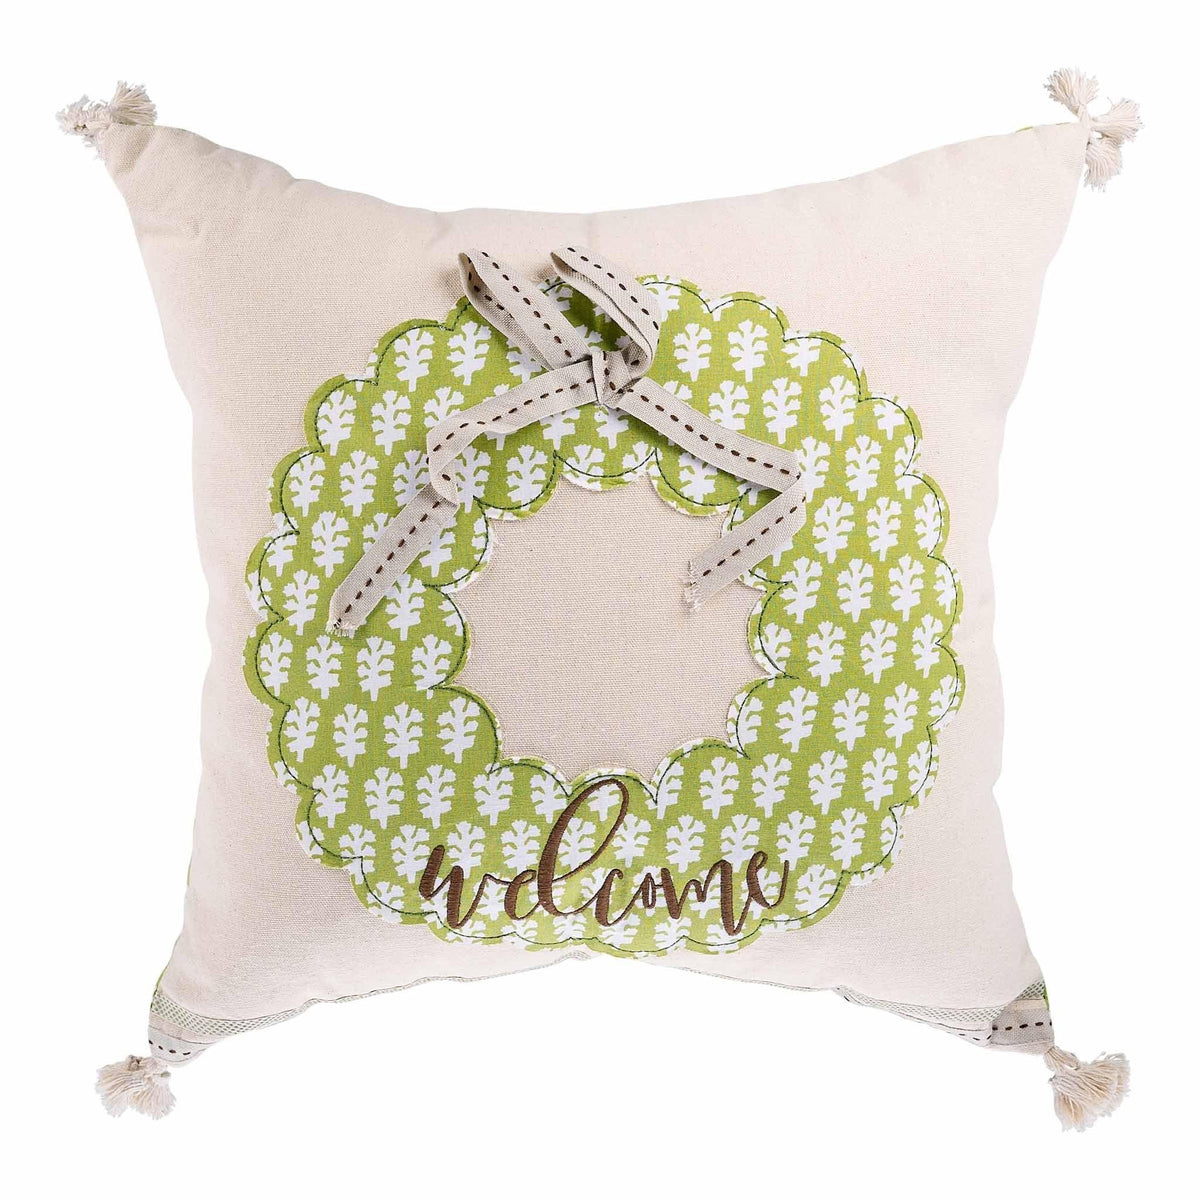 Green Welcome Wreath Pillow - GLORY HAUS 